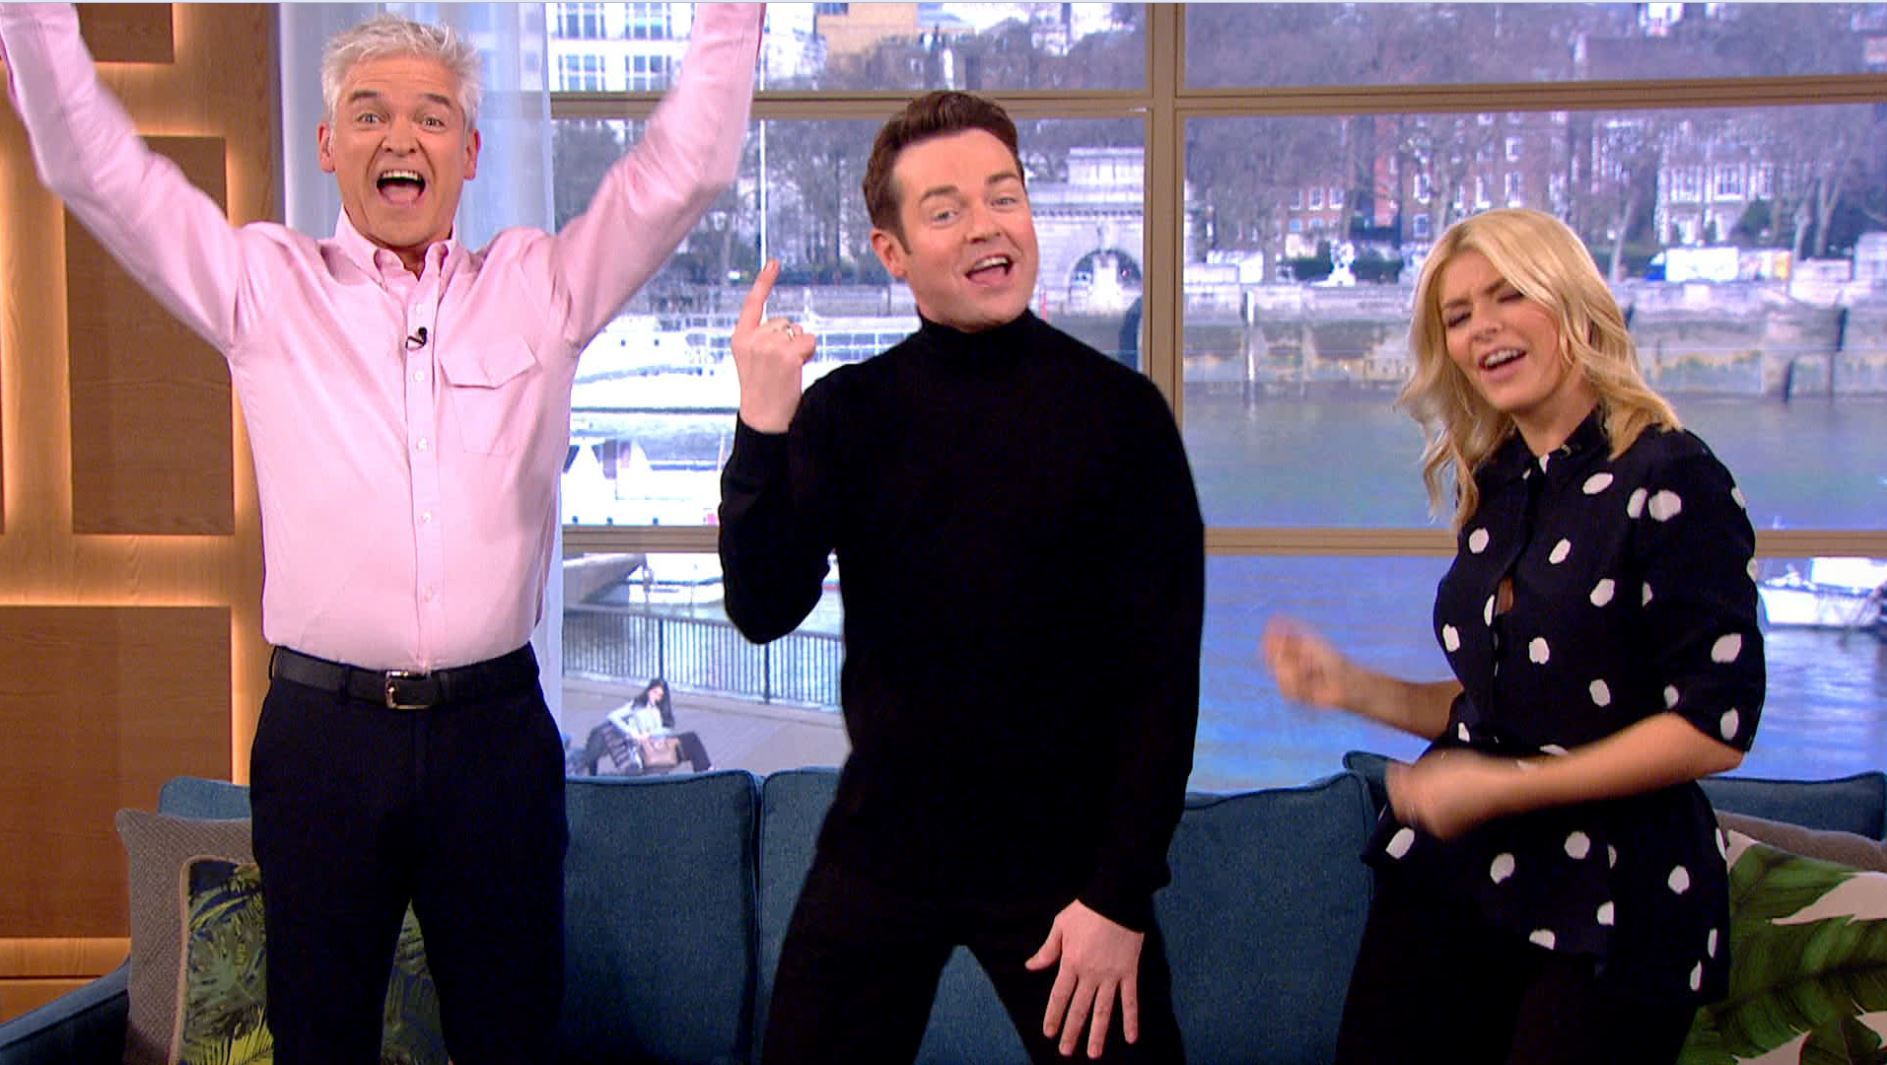 Stephen Mulhern used to appear with Holly Willoughby regularly on CITV in the early 2000s.